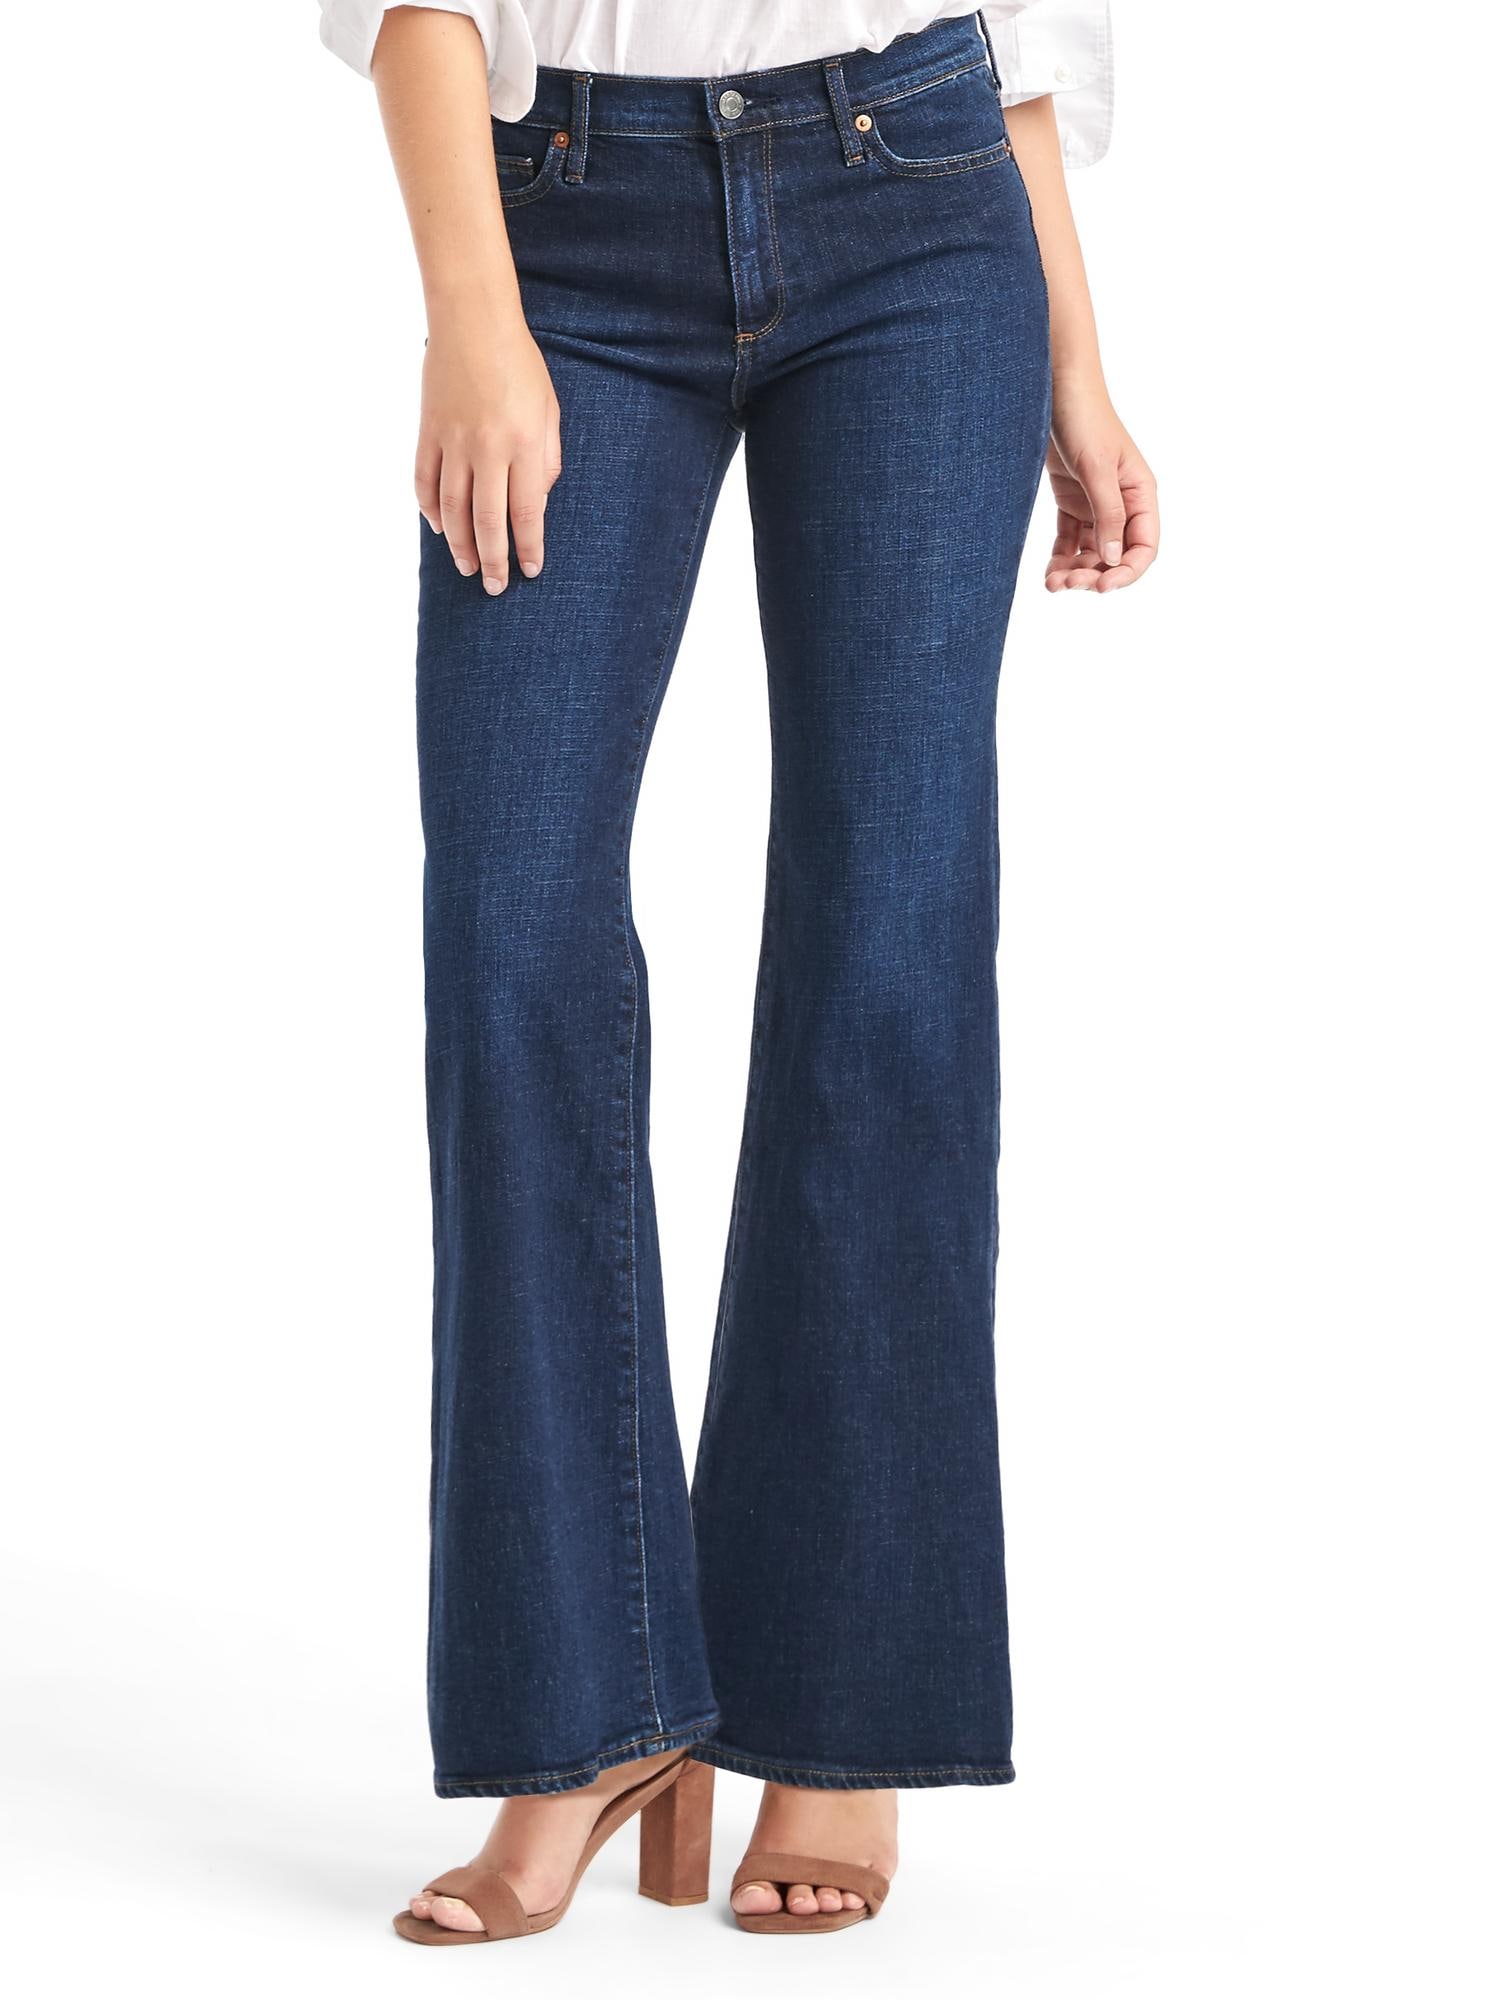 AUTHENTIC 1969 flare jeans